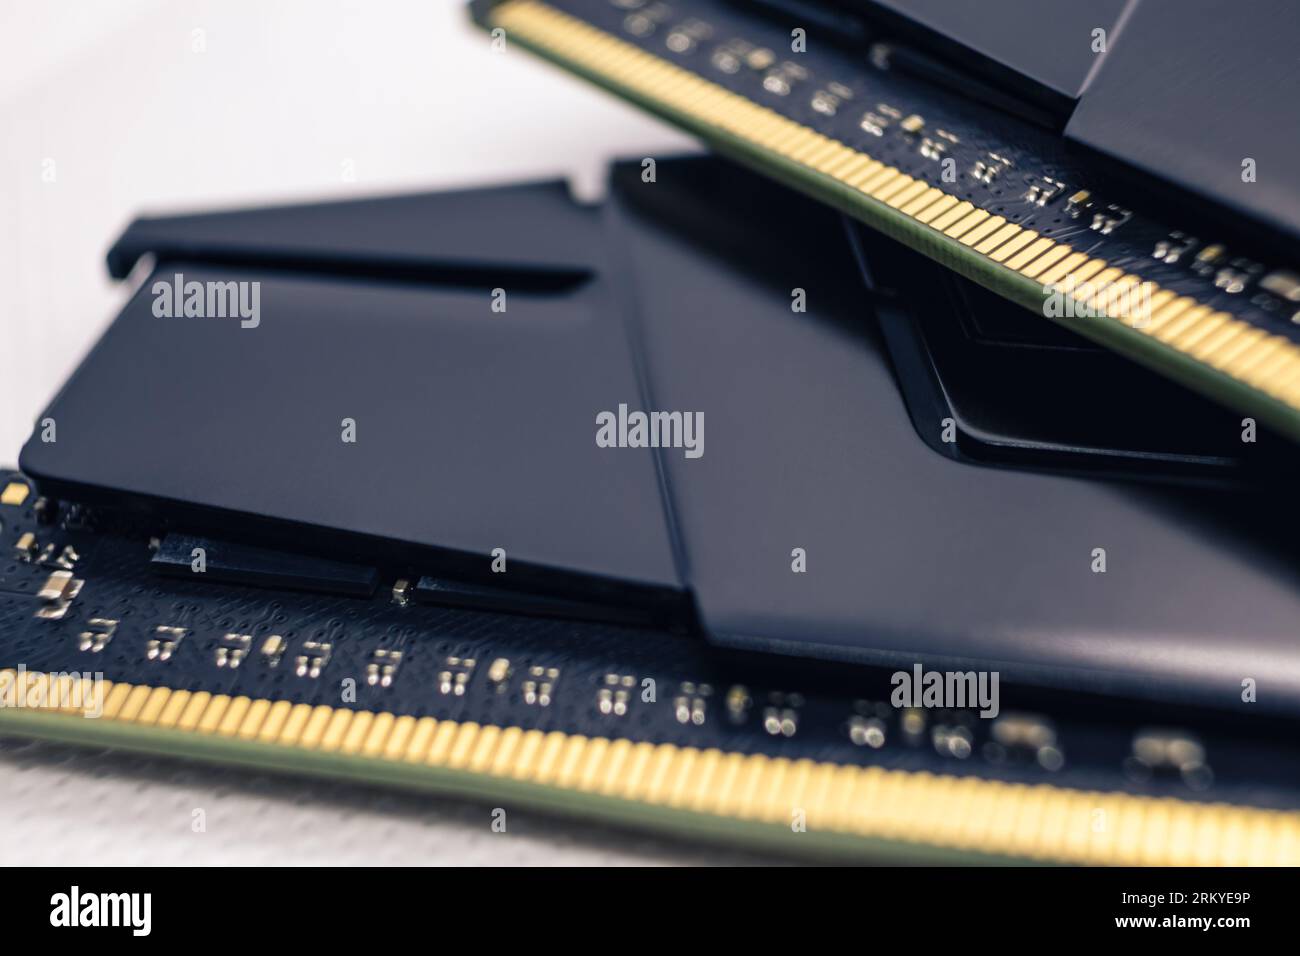 DDR4 DRAM memory modules electrical contact macro. Computer RAM chipset close-up. Desktop PC hardware components Stock Photo